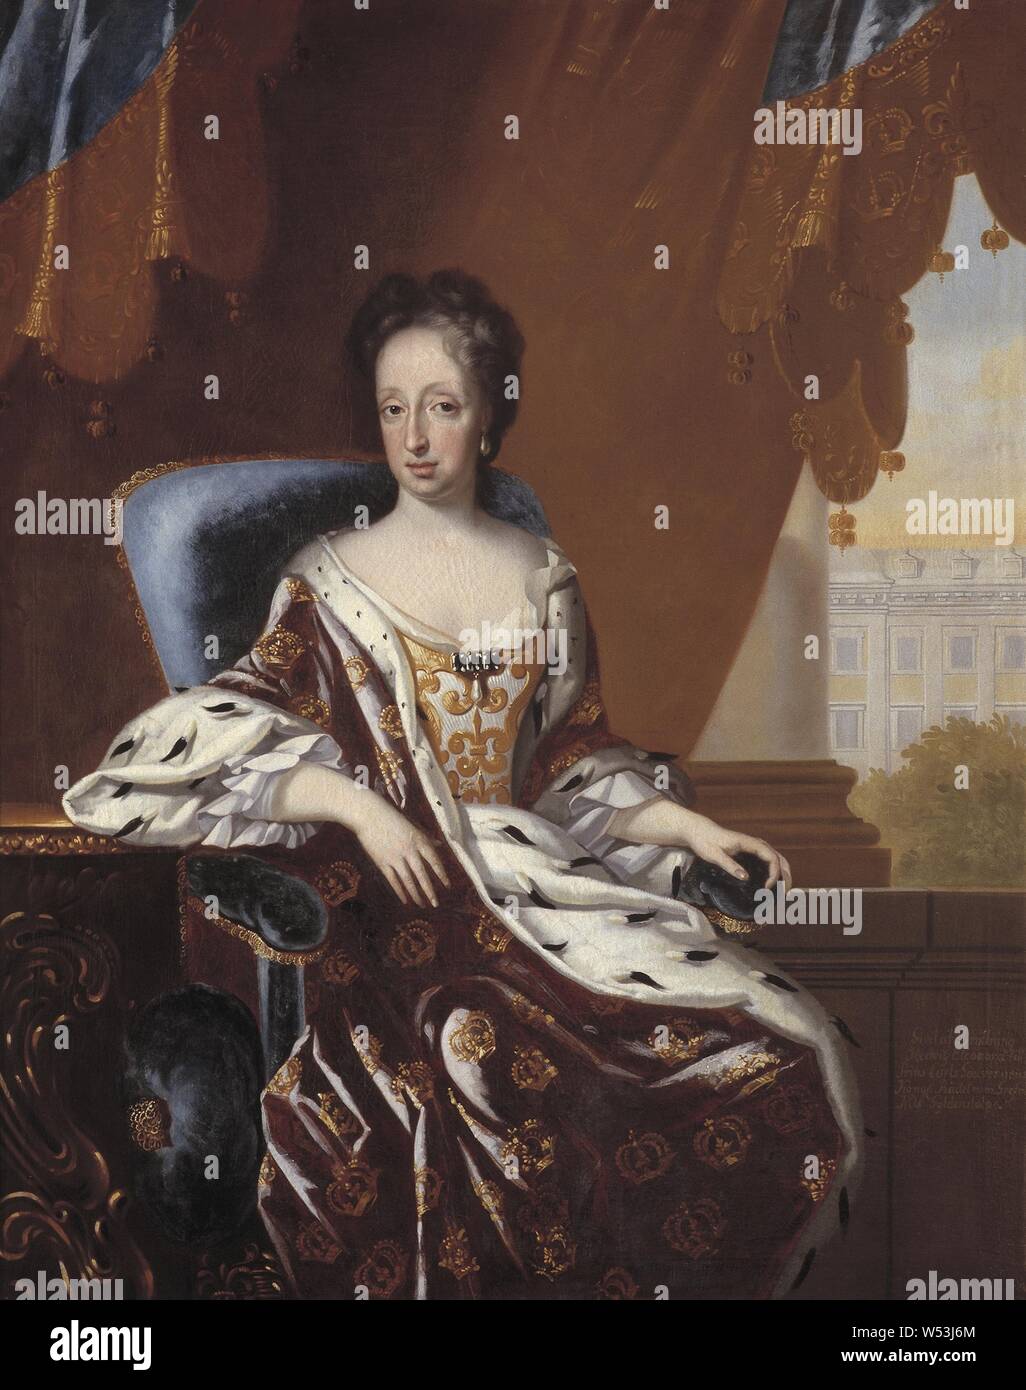 Attributed to David von Krafft, Queen Hedvig Eleonora, Hedvig Eleonora, 1636-1715, Princess of Holstein-Gottorp, Queen of Sweden, oil on canvas, Height, 147 cm (57.8 inches), Width, 121 cm (47.6 inches) Stock Photo